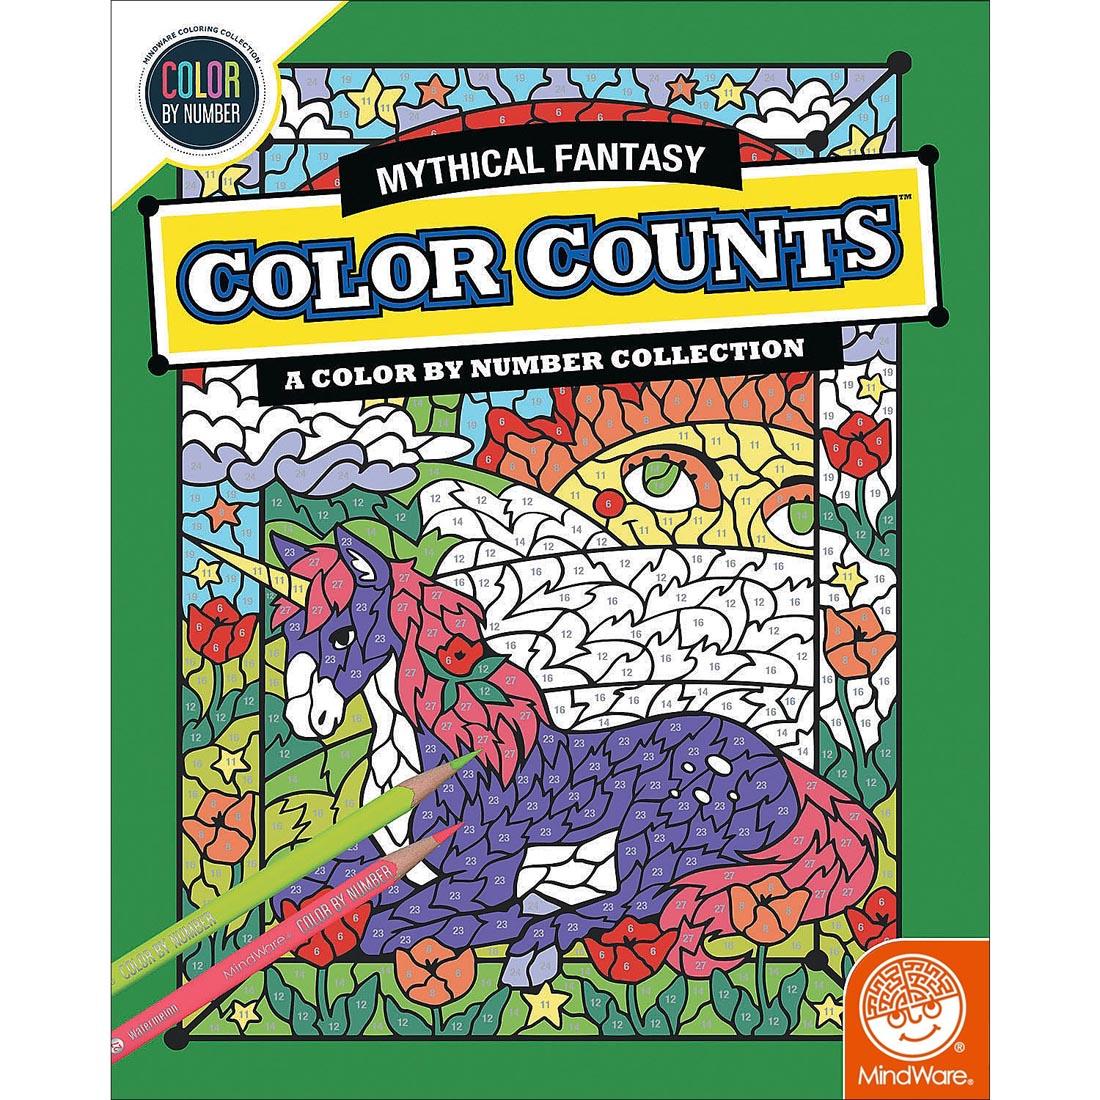 Mindware Color By Number Mythical Fantasy Color Counts